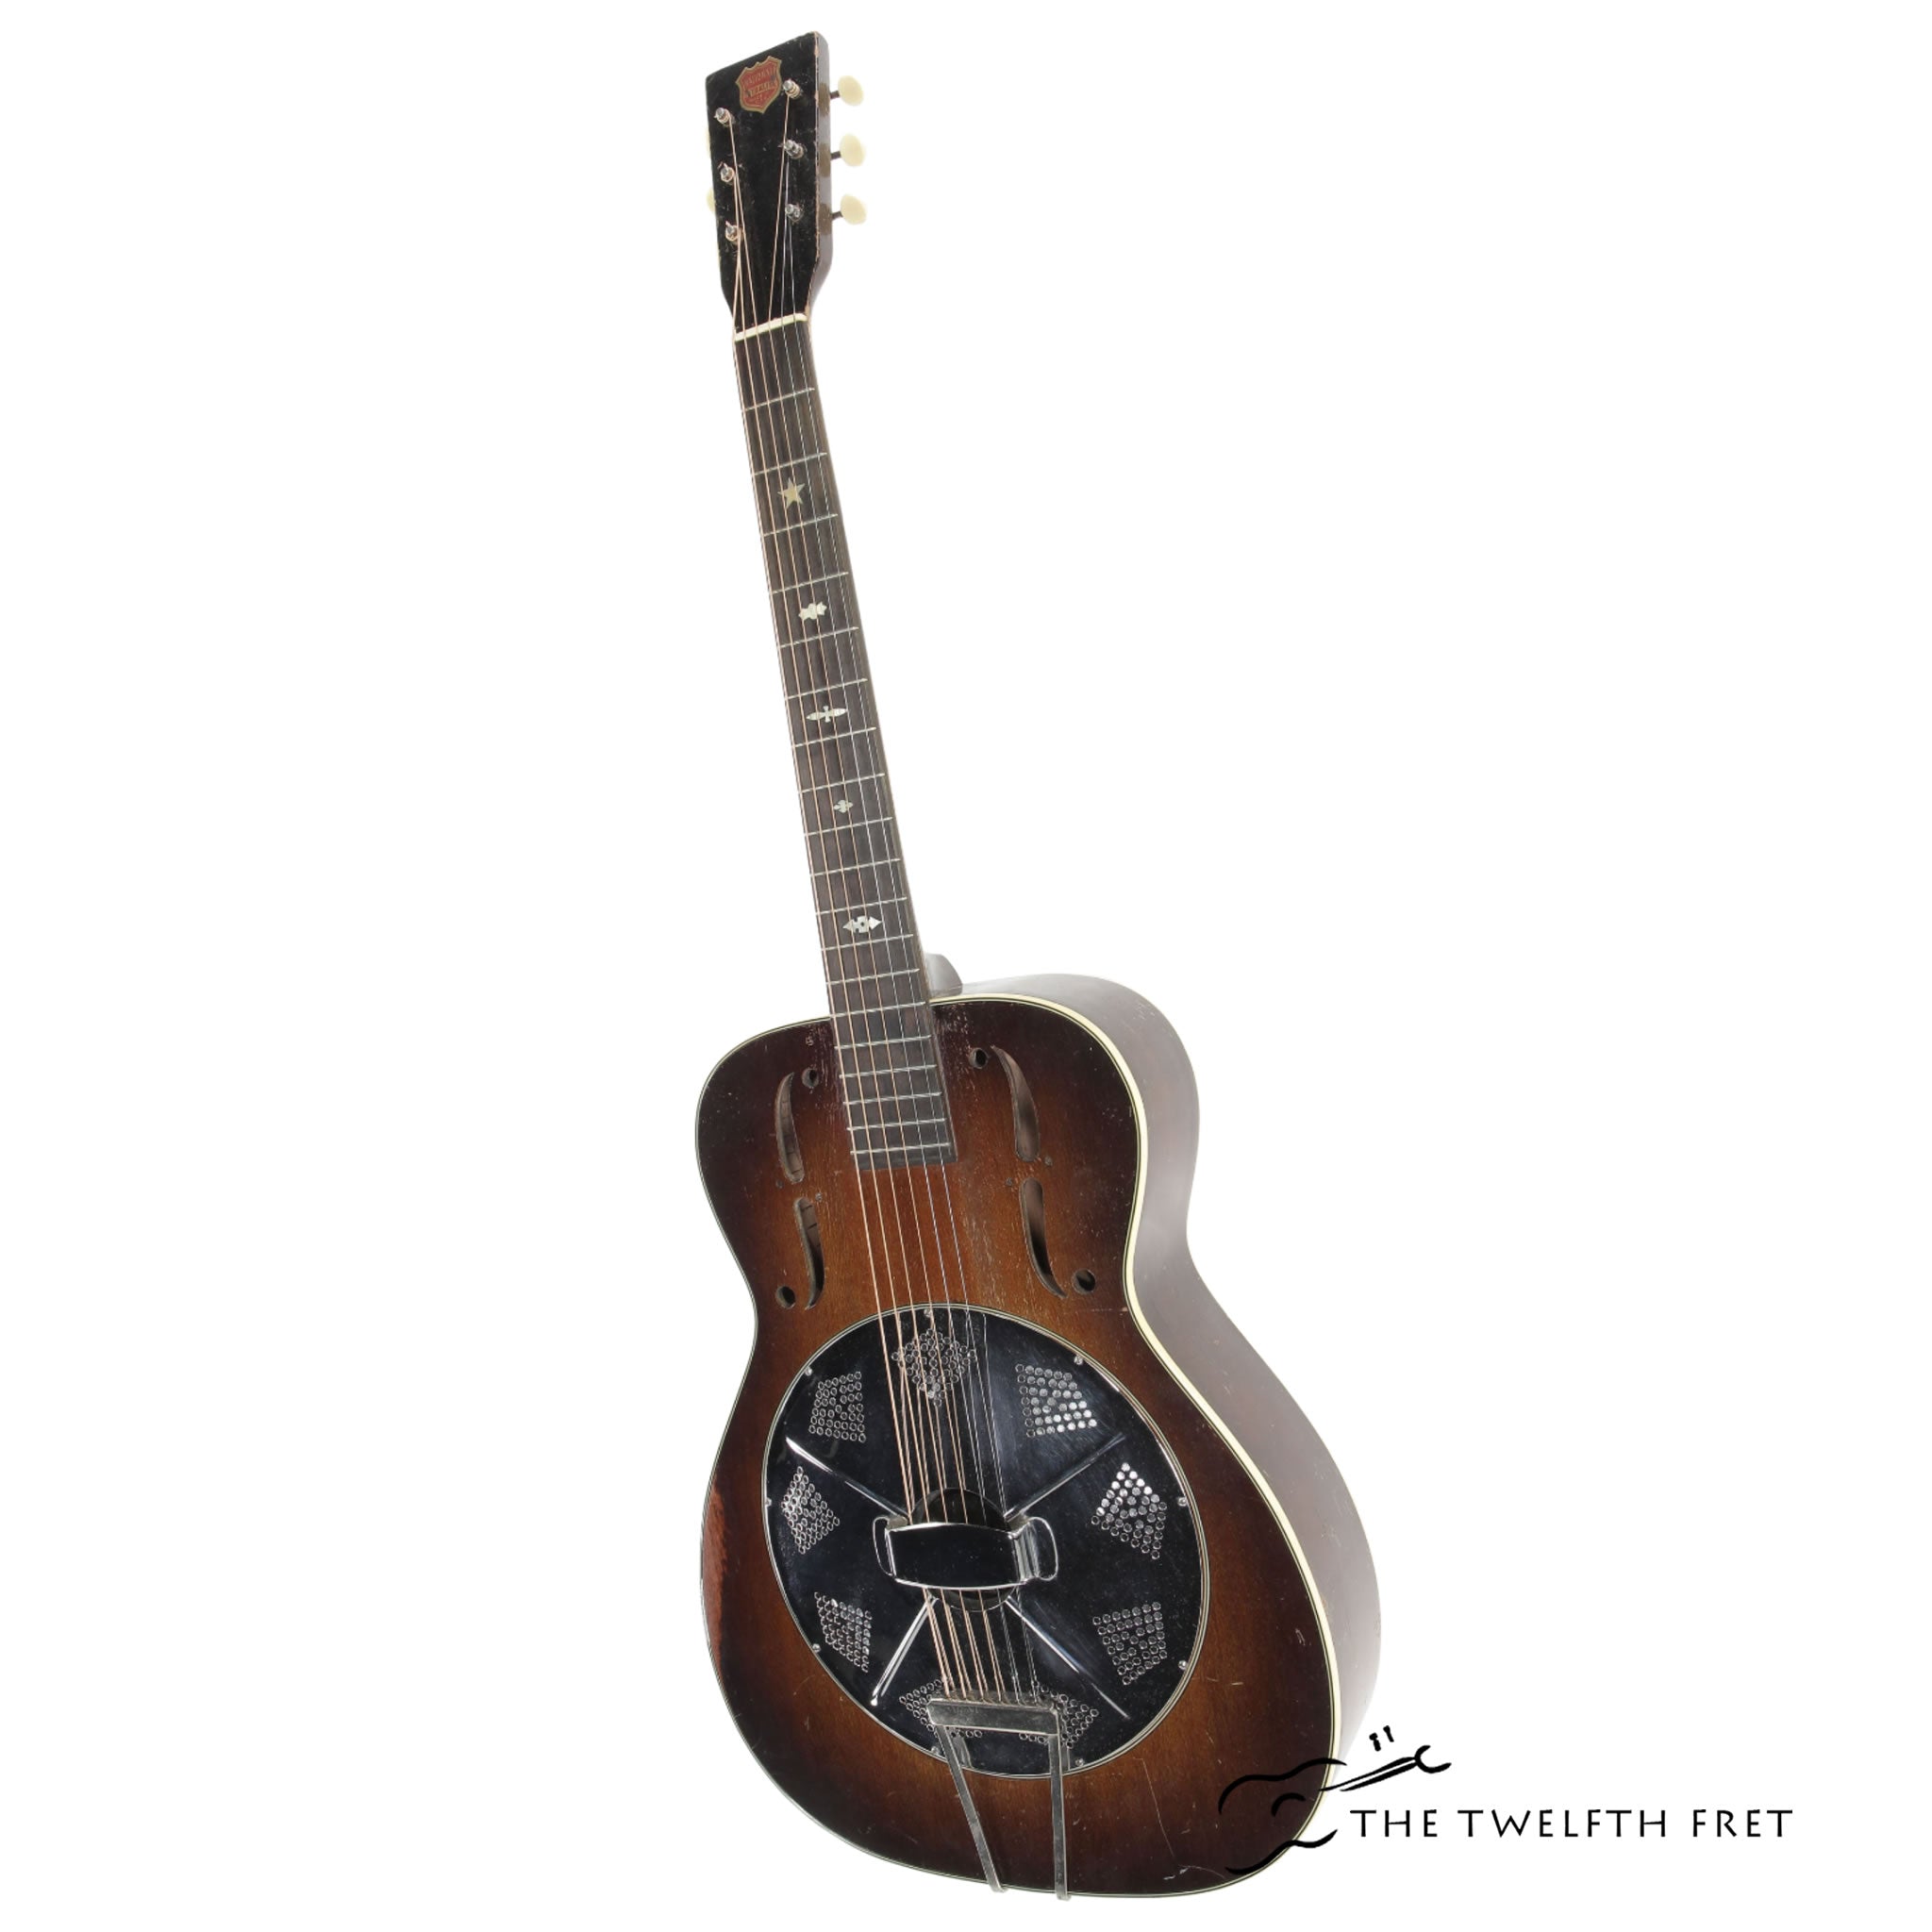 National Estralita Shaded Brown, 1936 - The Twelfth Fret